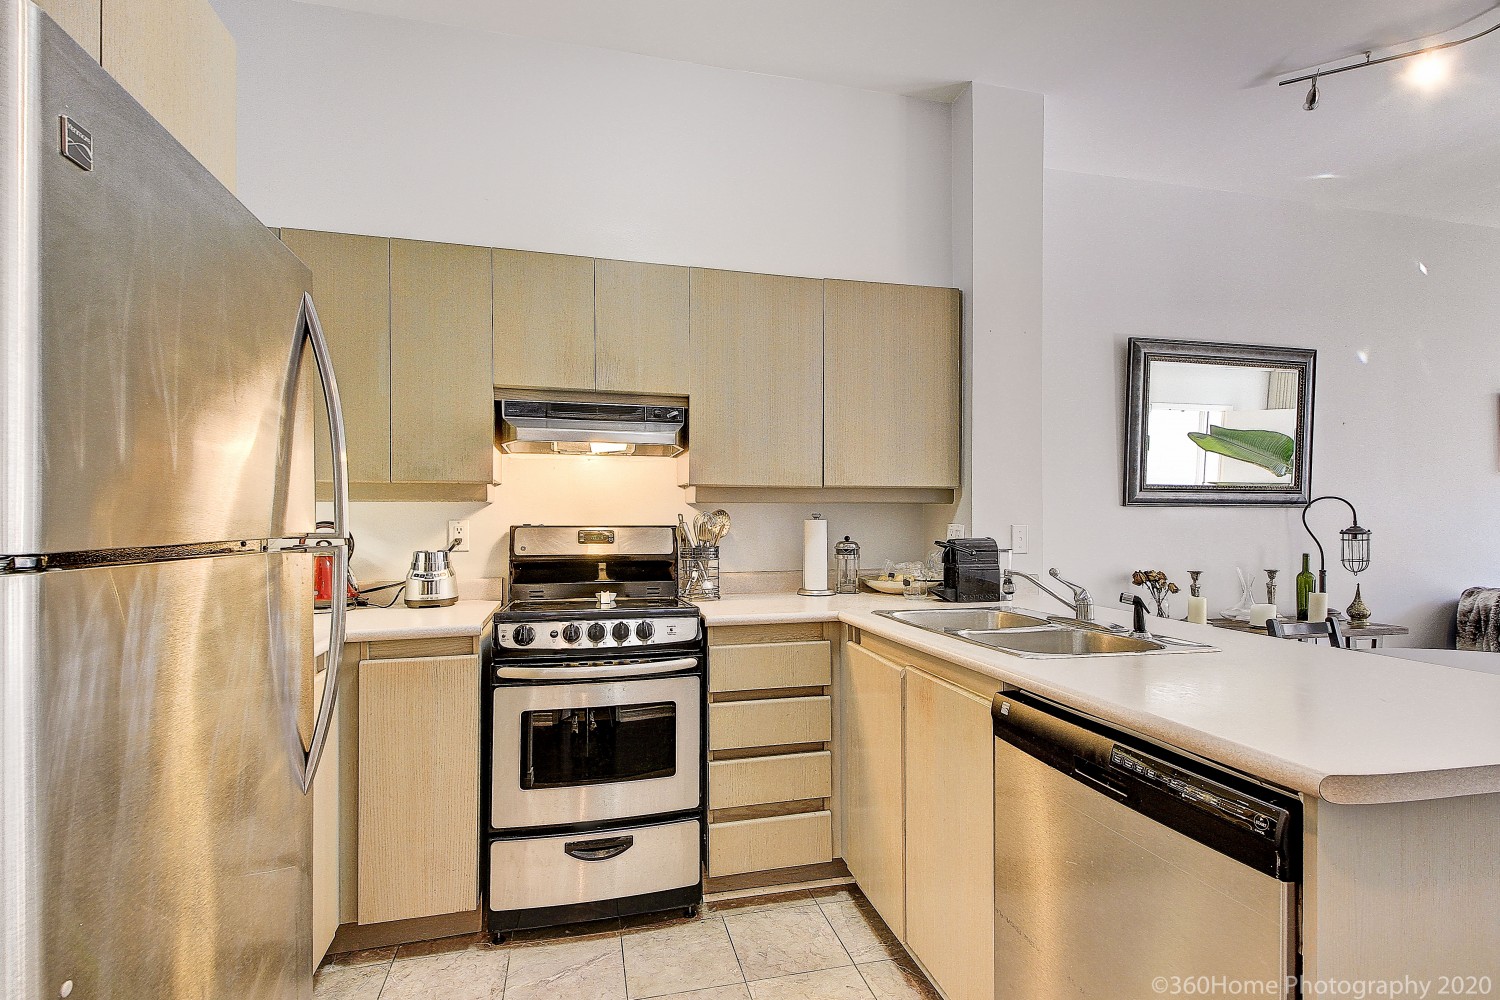 Somewhat old condo kitchen with beige cabinets, marble tiles and stainless-steel stove and fridge.